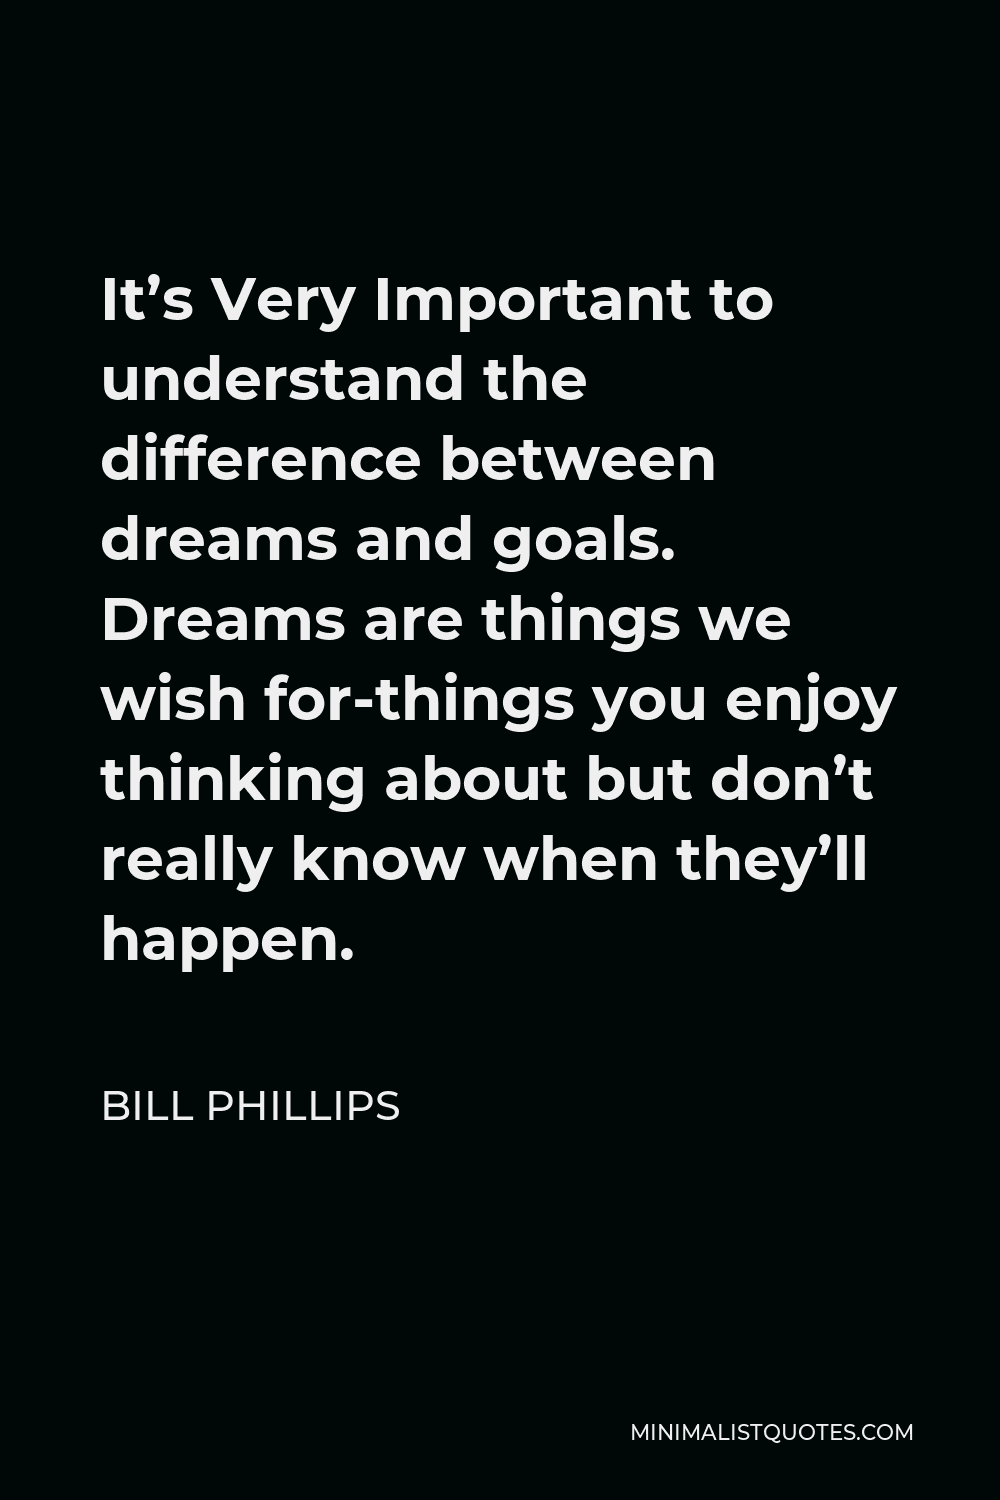 Bill Phillips Quote - It’s Very Important to understand the difference between dreams and goals. Dreams are things we wish for-things you enjoy thinking about but don’t really know when they’ll happen.